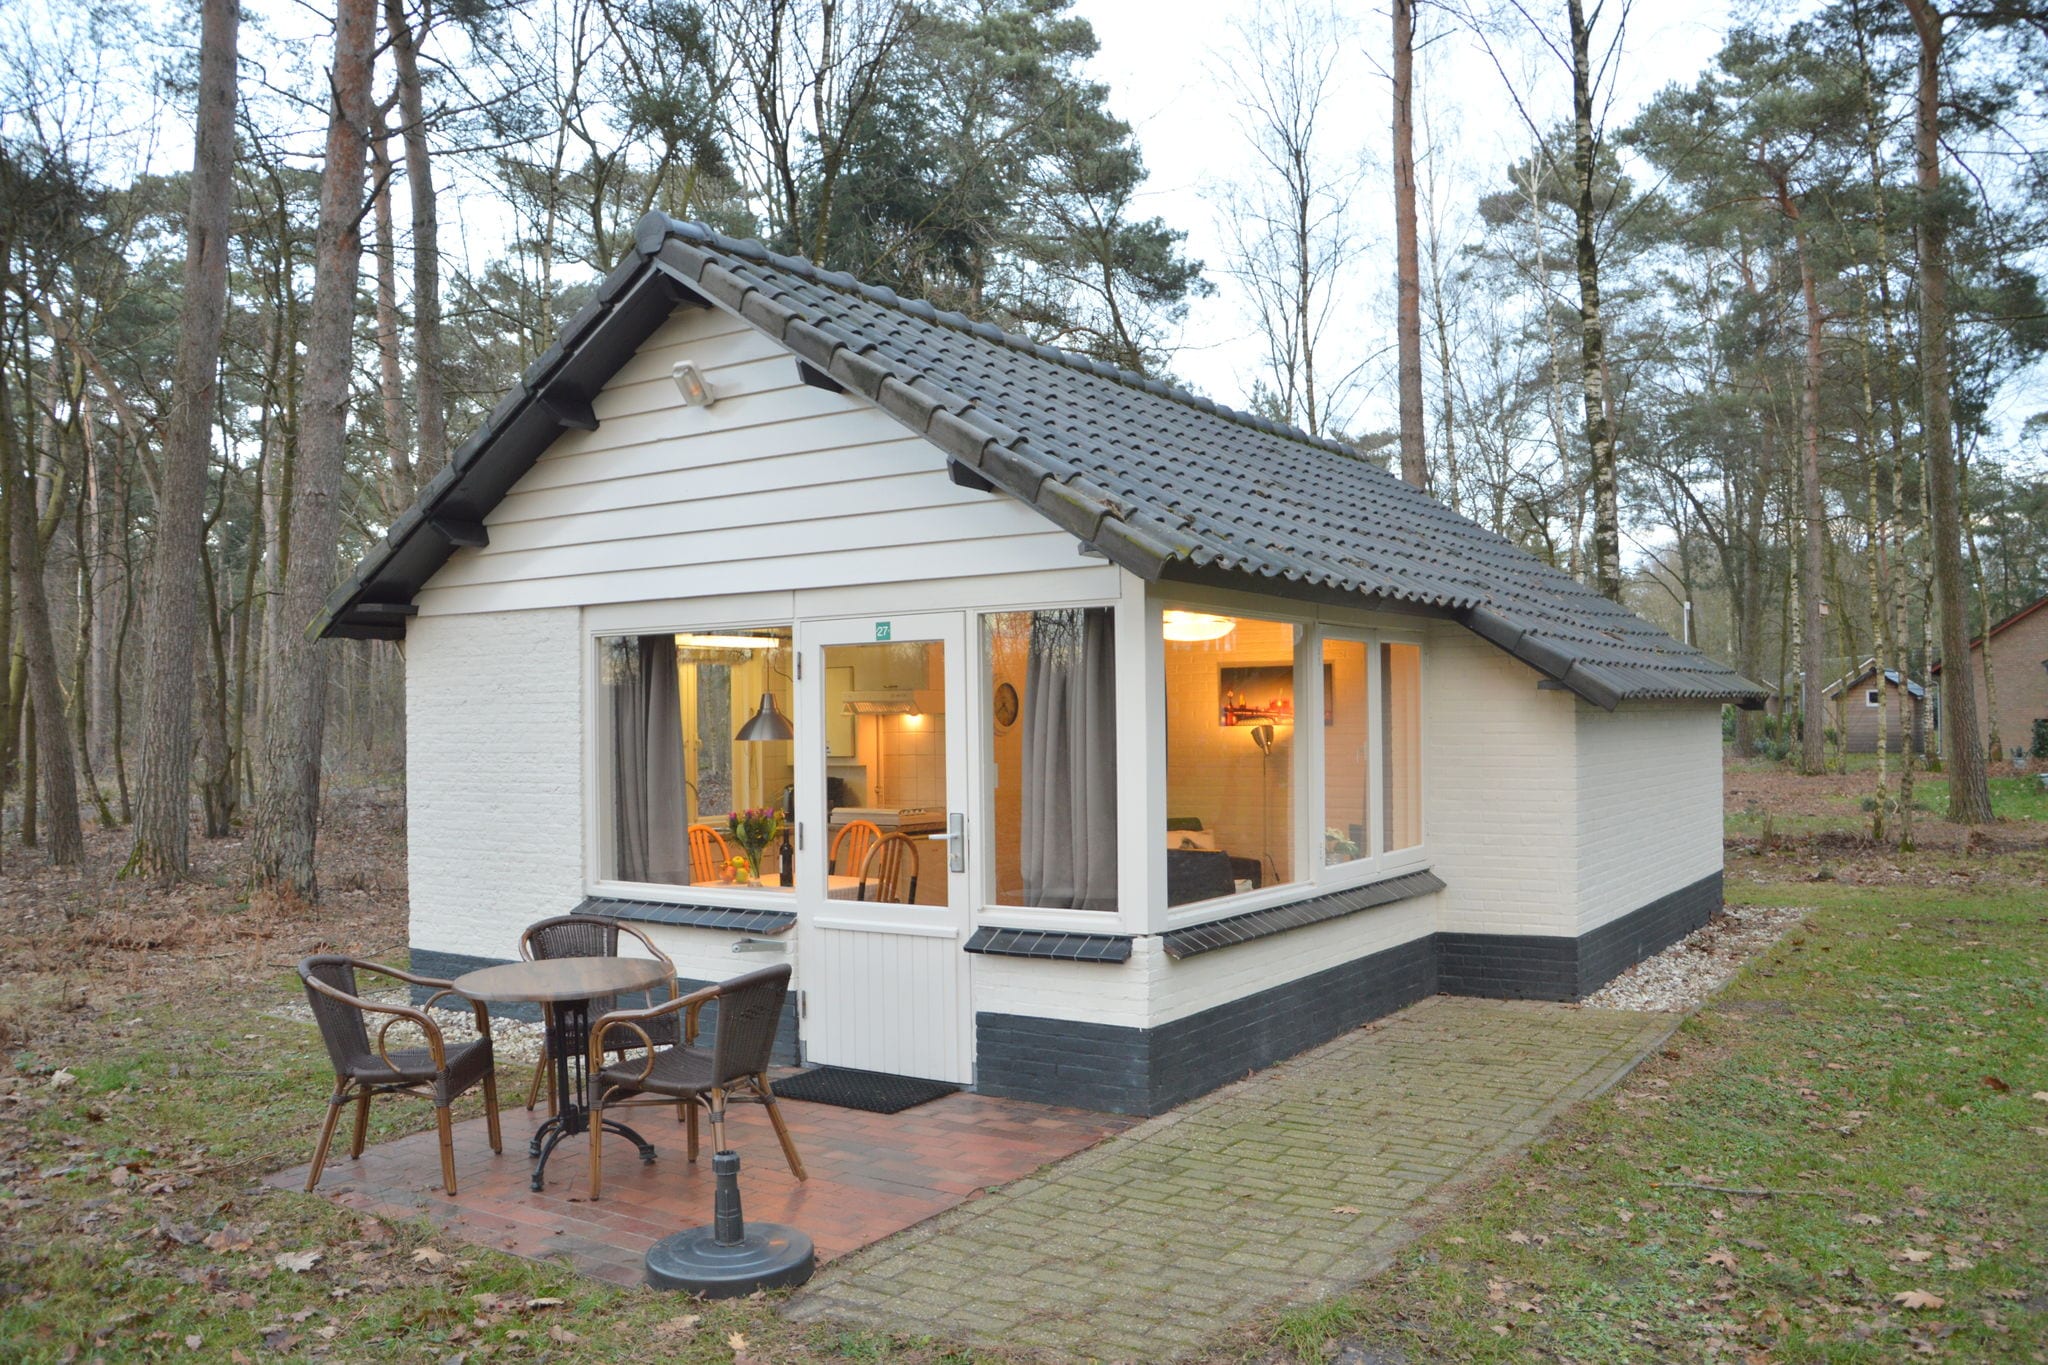 detached bungalow in a nature-filled park